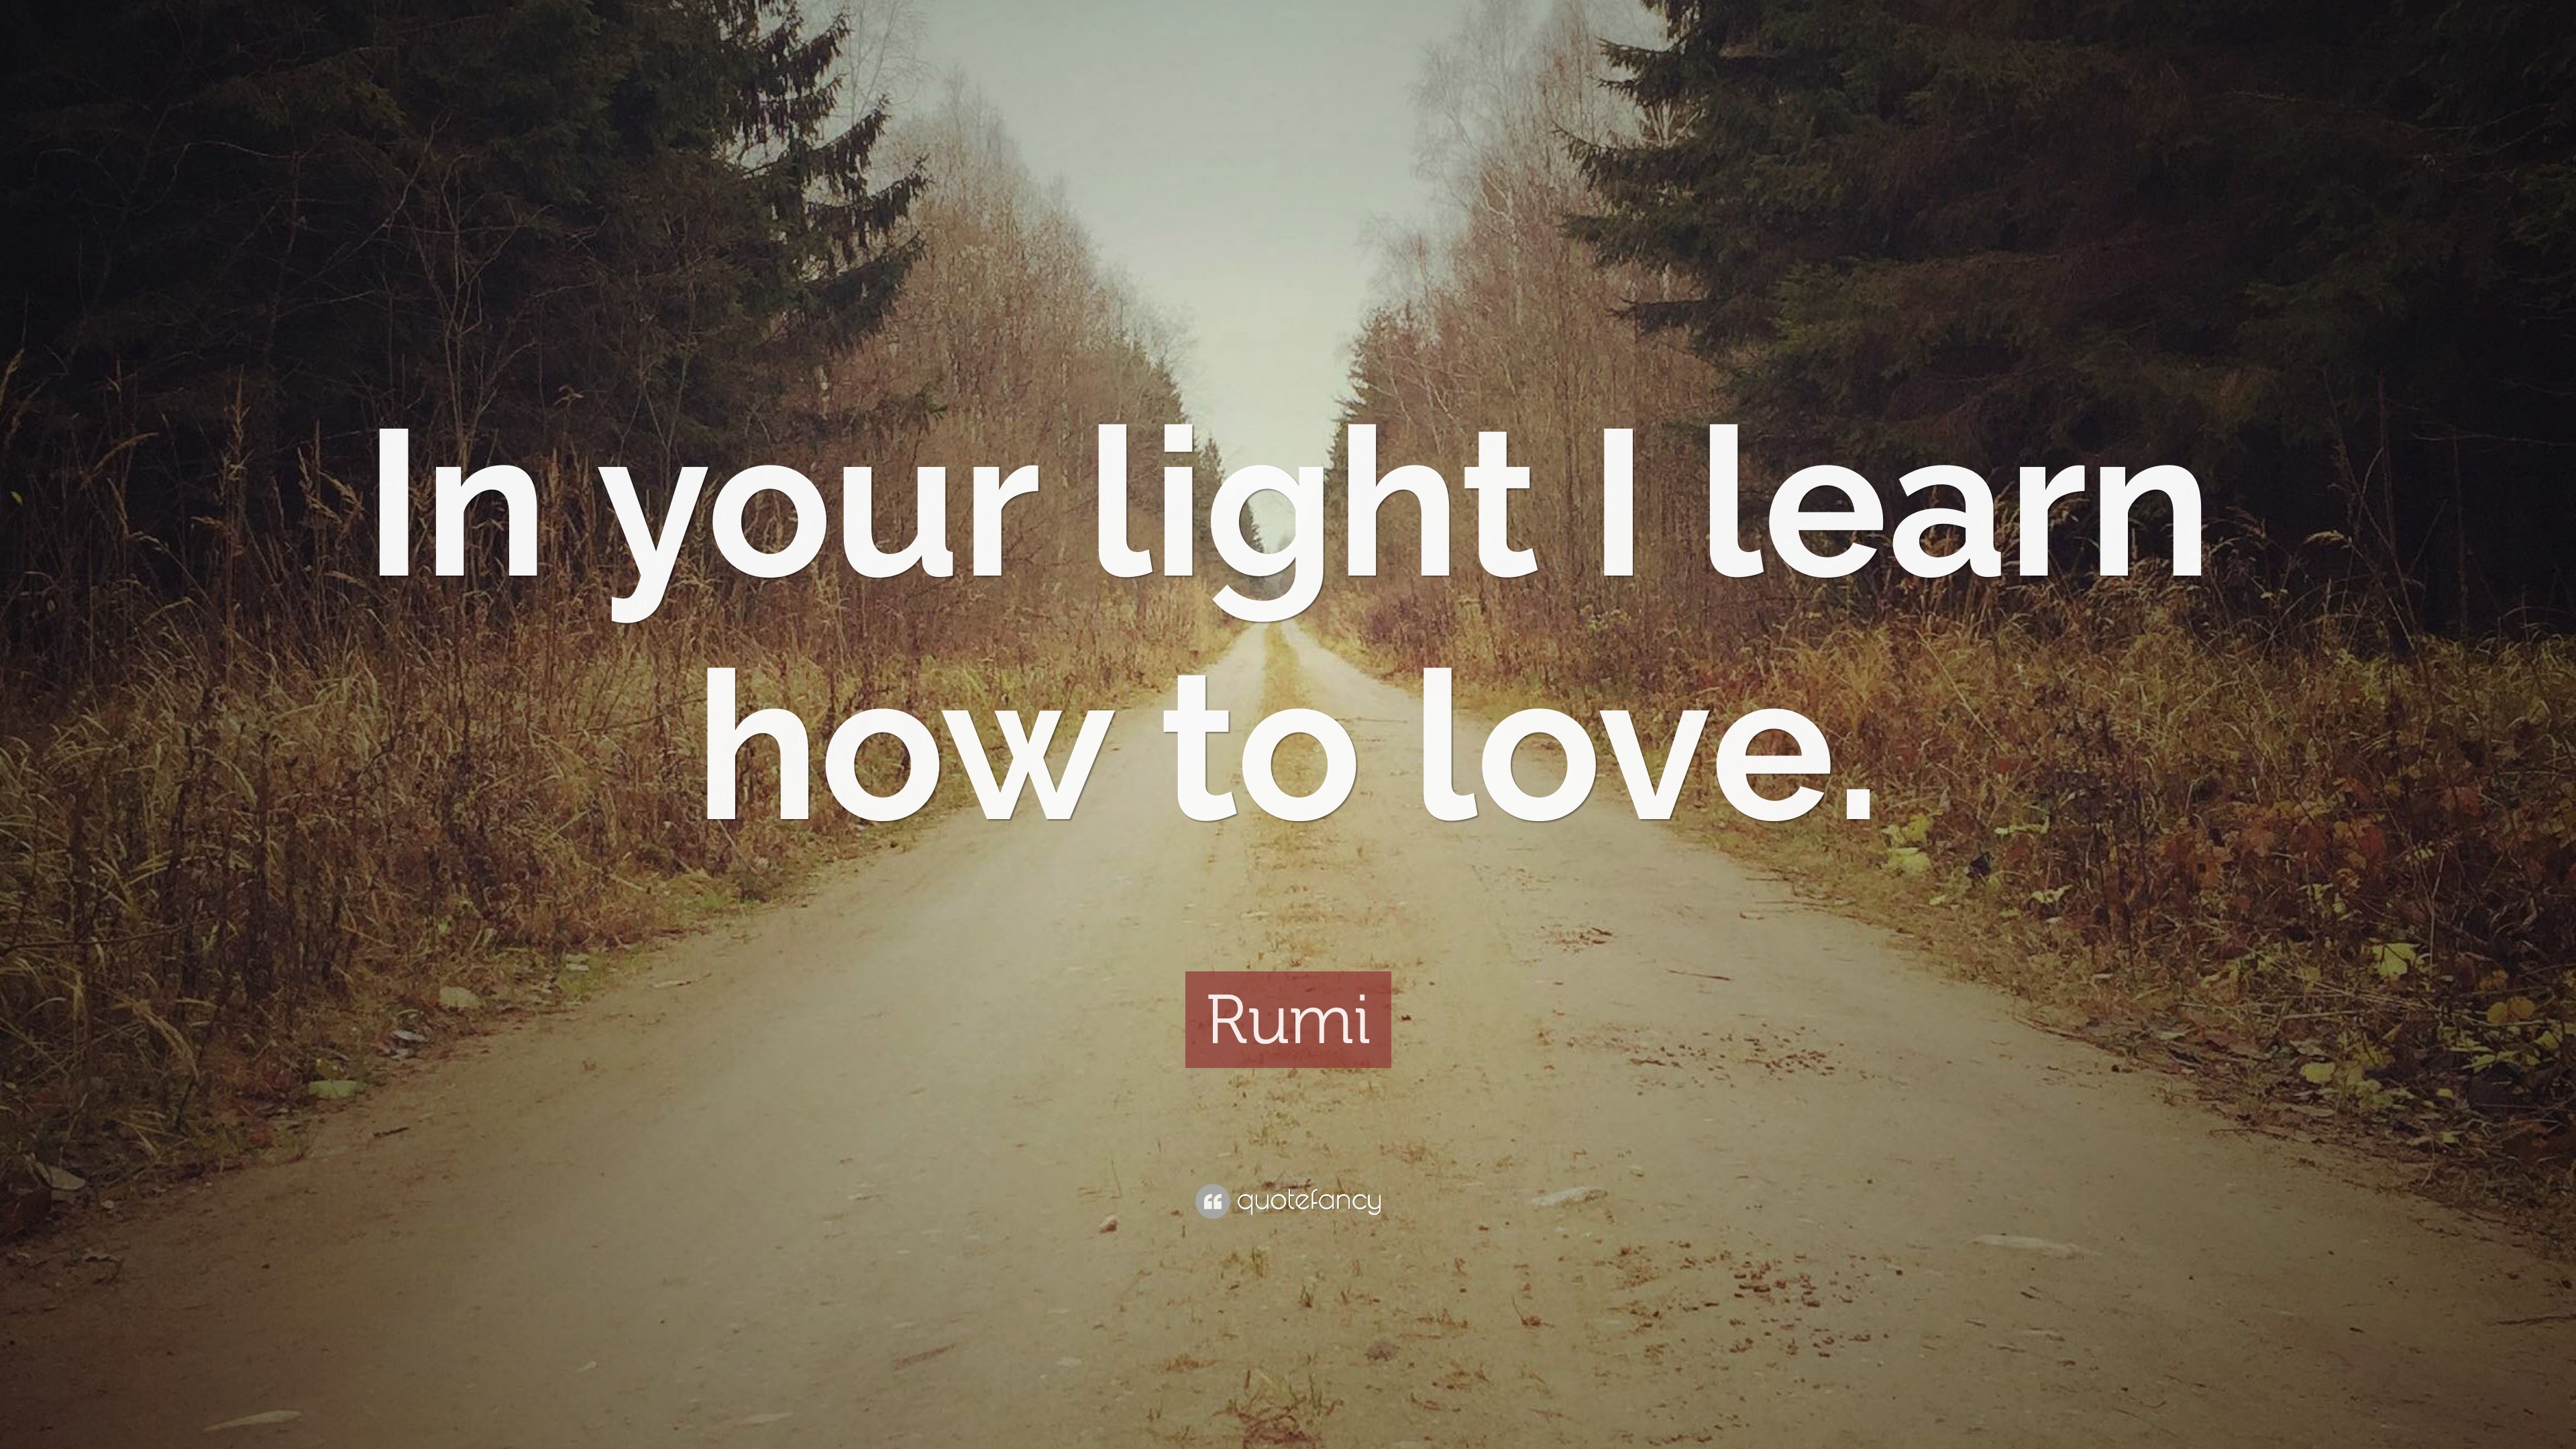 Rumi Quote: “In your light I learn how to love.” (22 wallpapers